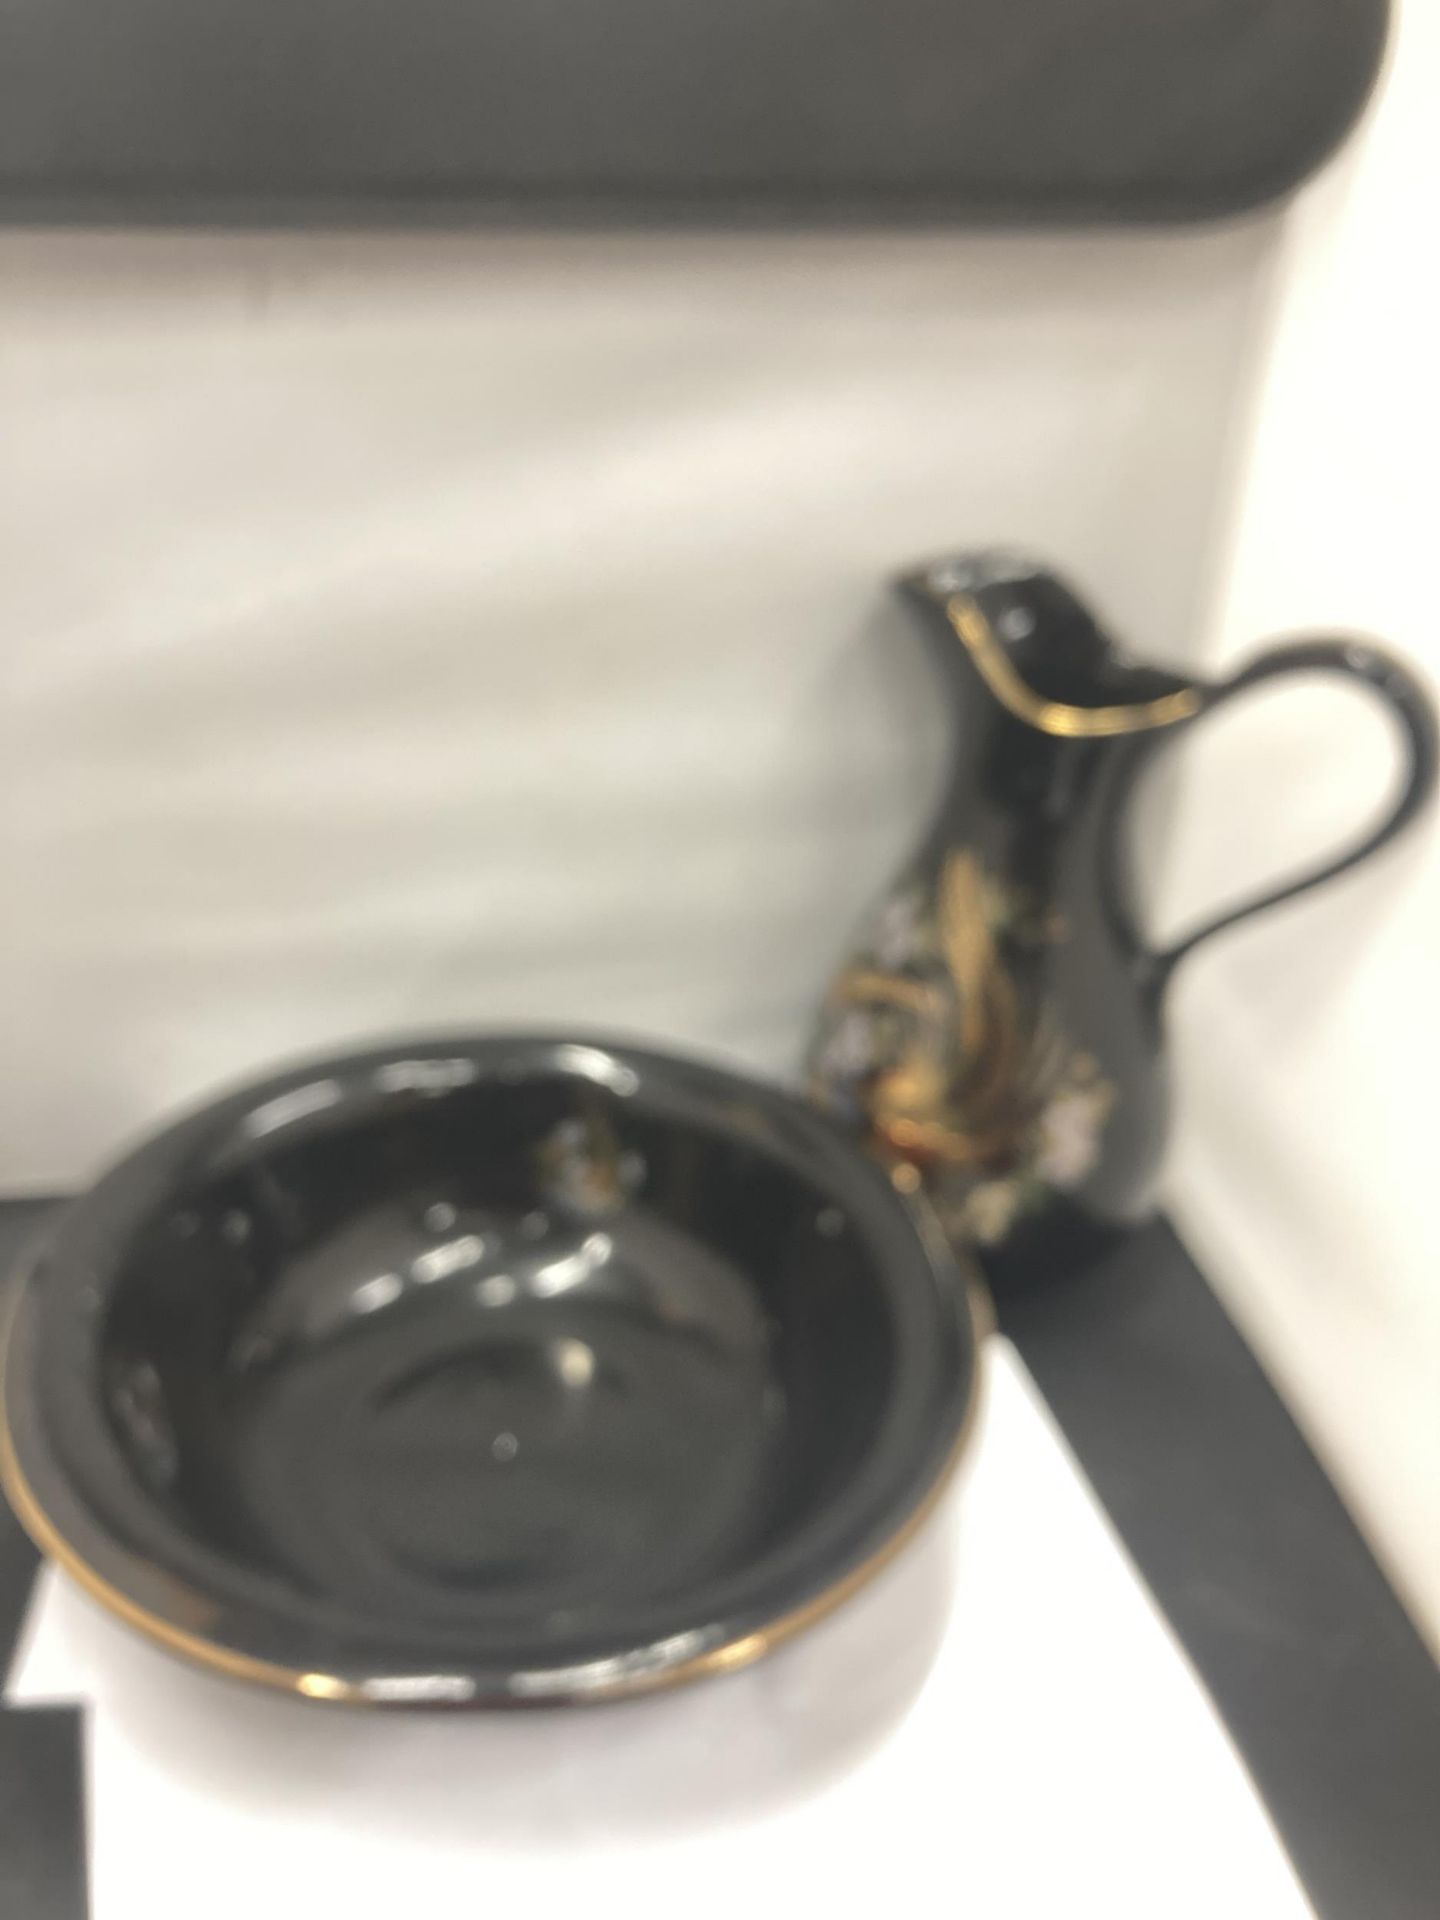 A LARGE WASH BOWL AND JUG SET IN BLACK WITH BIRD DECORATION - Image 2 of 2